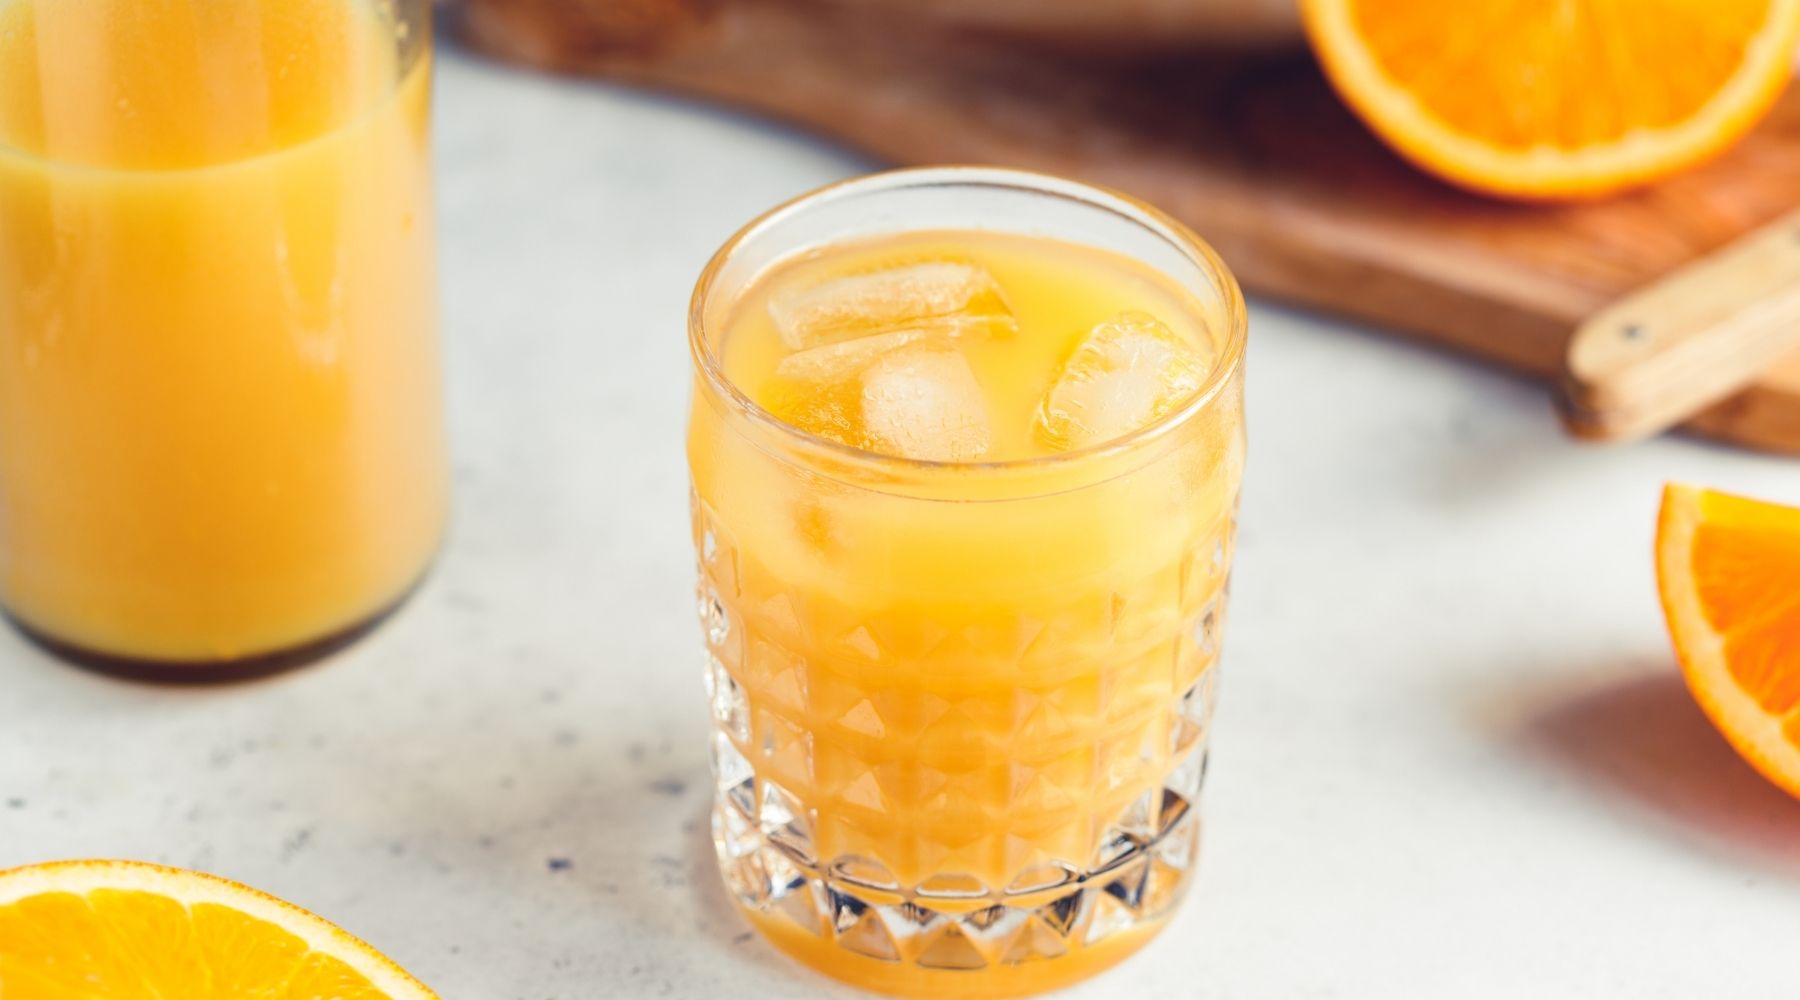 Orange juice helps maintain a healthy balance in your diet